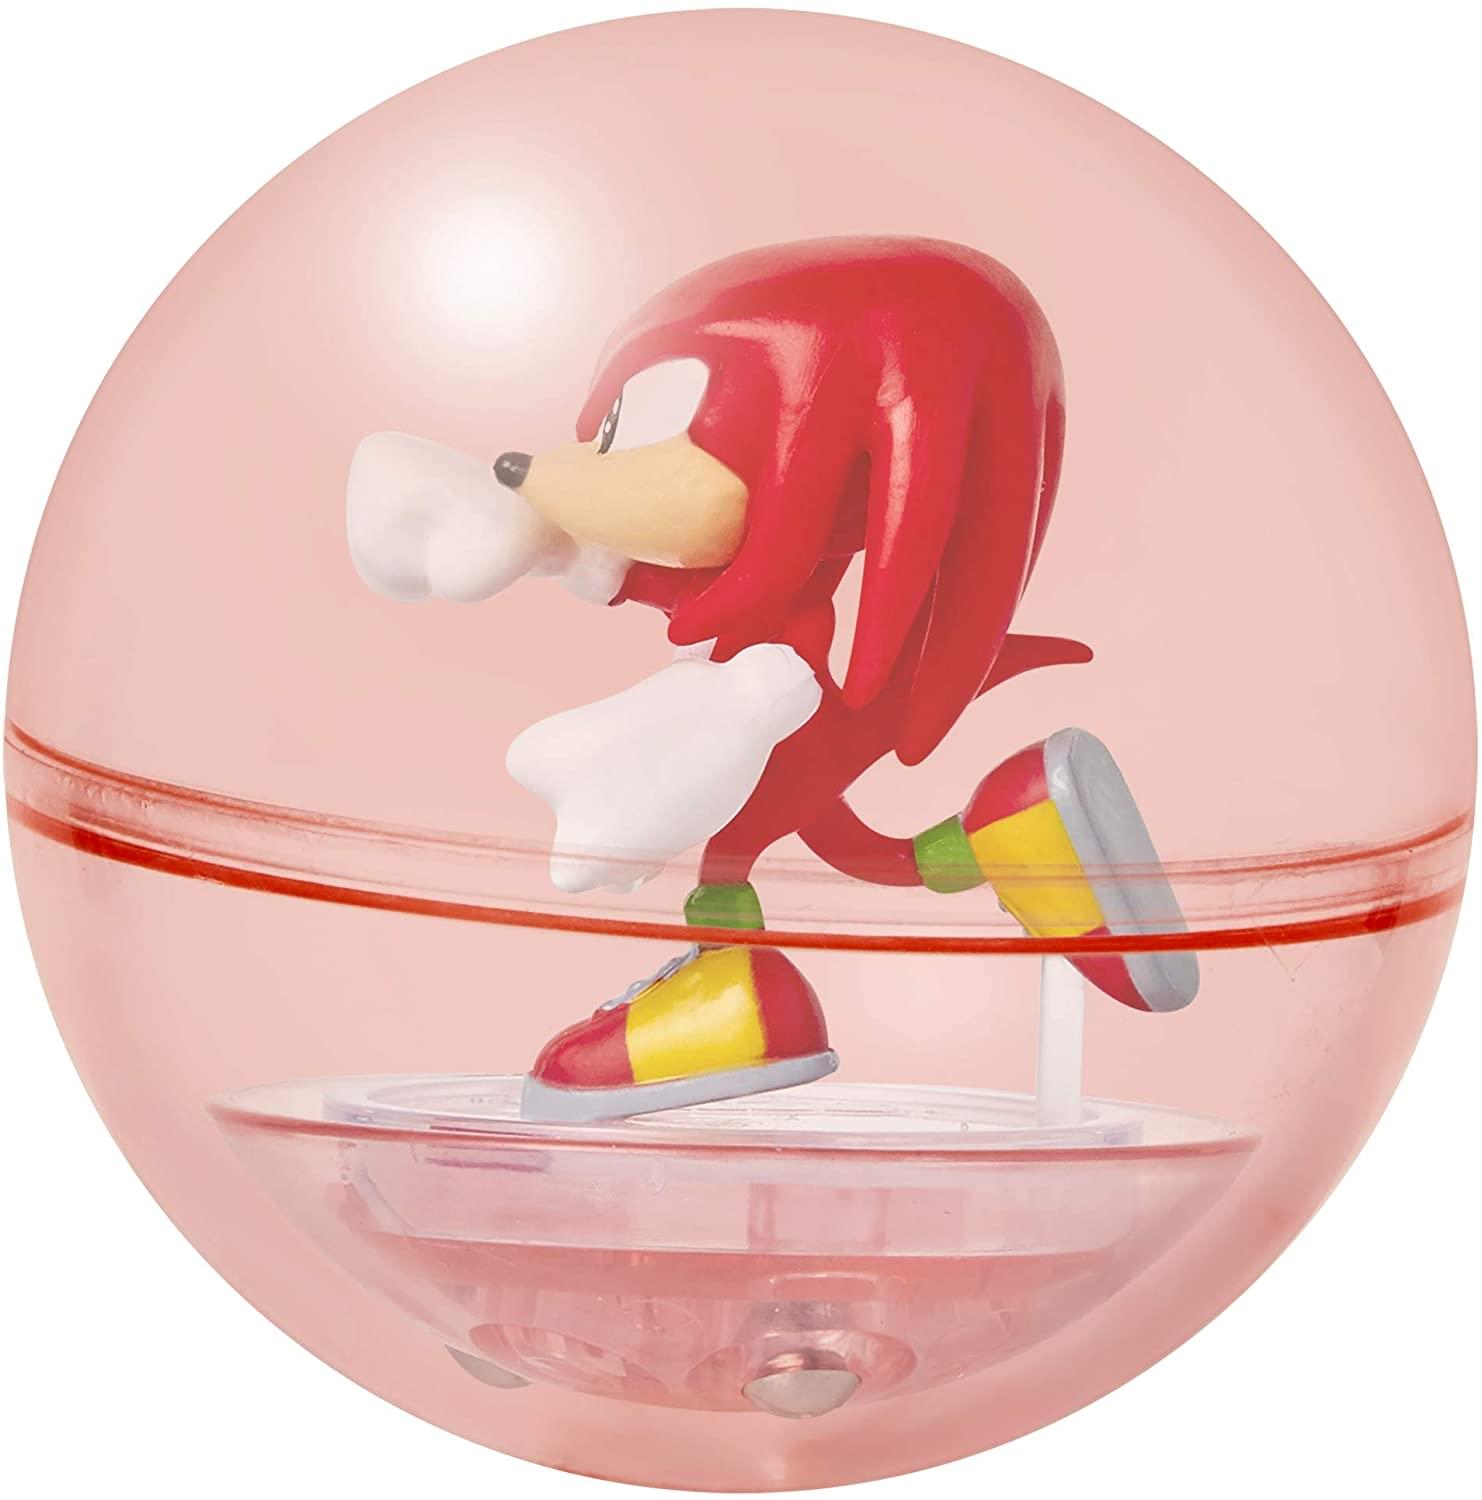 Sonic The Hedgehog 2 Inch Booster Sphere Figure | Knuckles